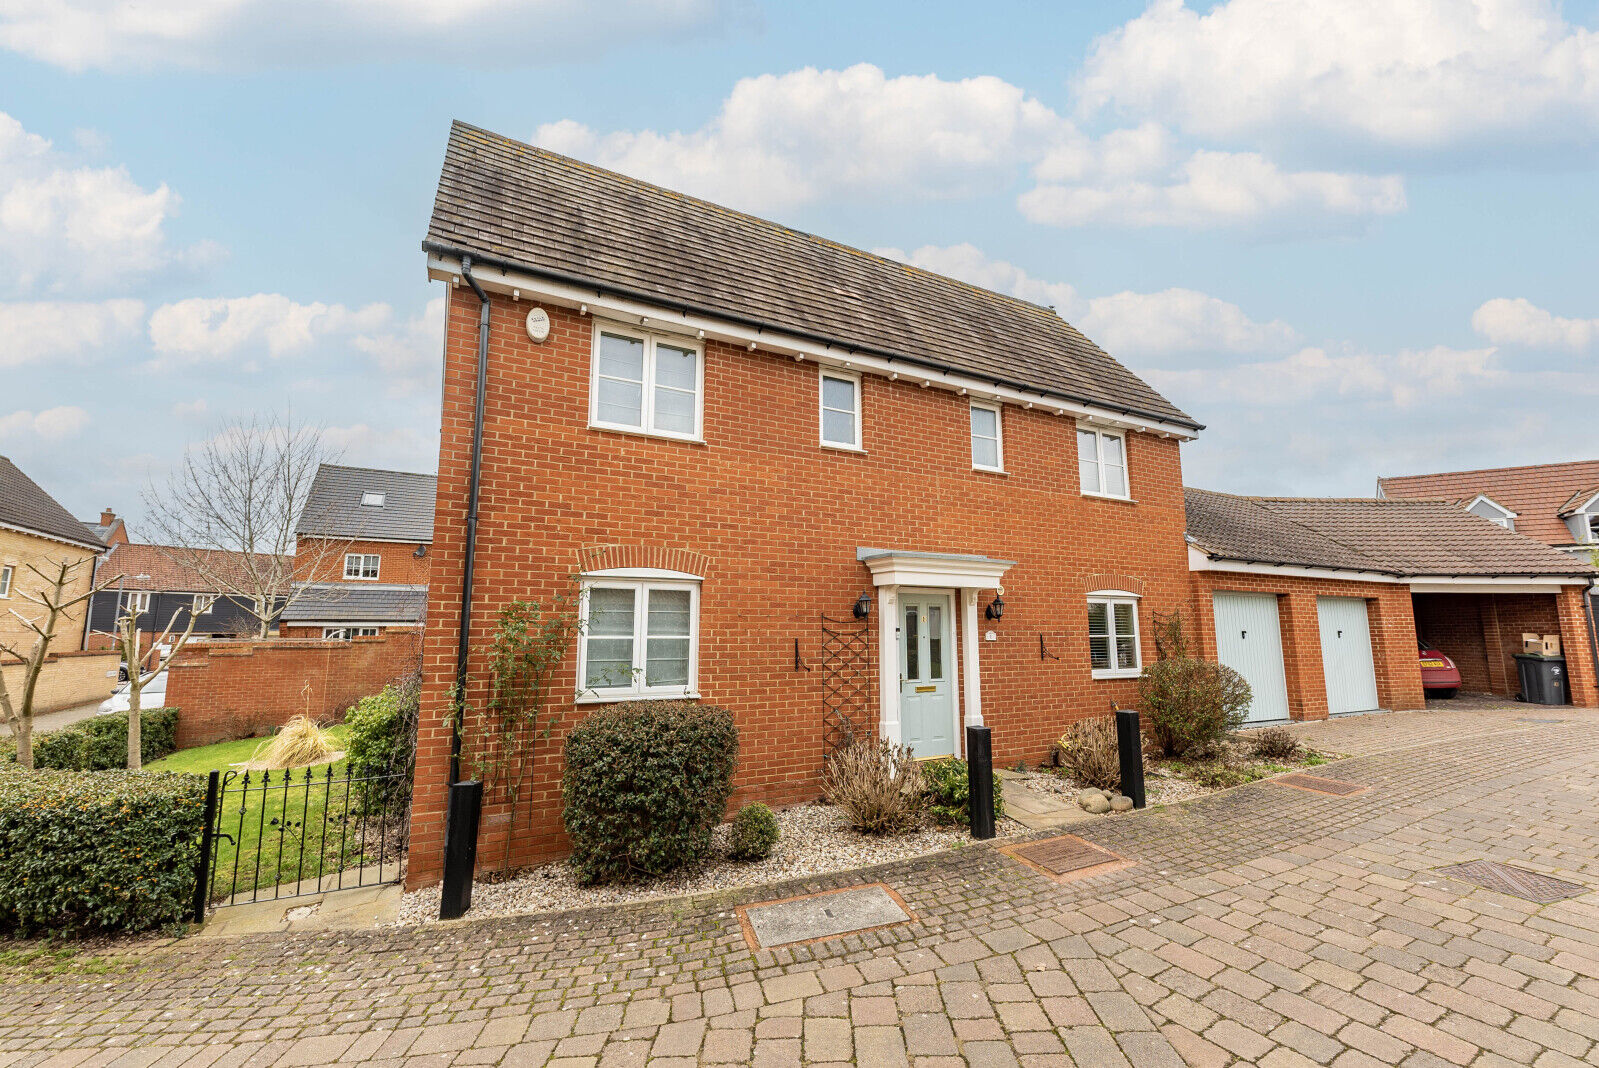 4 bedroom detached house for sale Davies Way, Flitch Green, CM6, main image